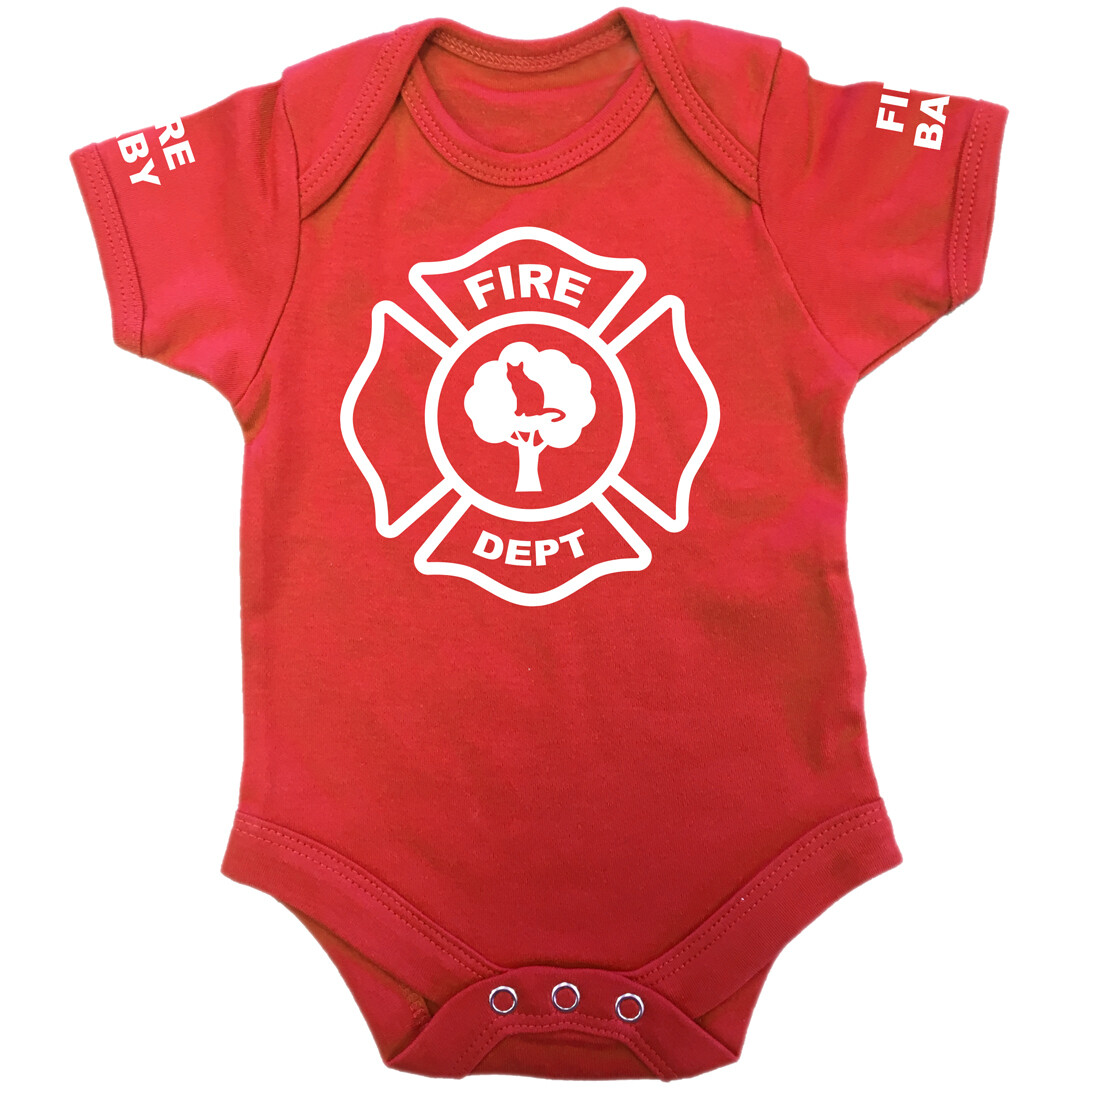 Personalised 'Fire Baby' Baby Grow